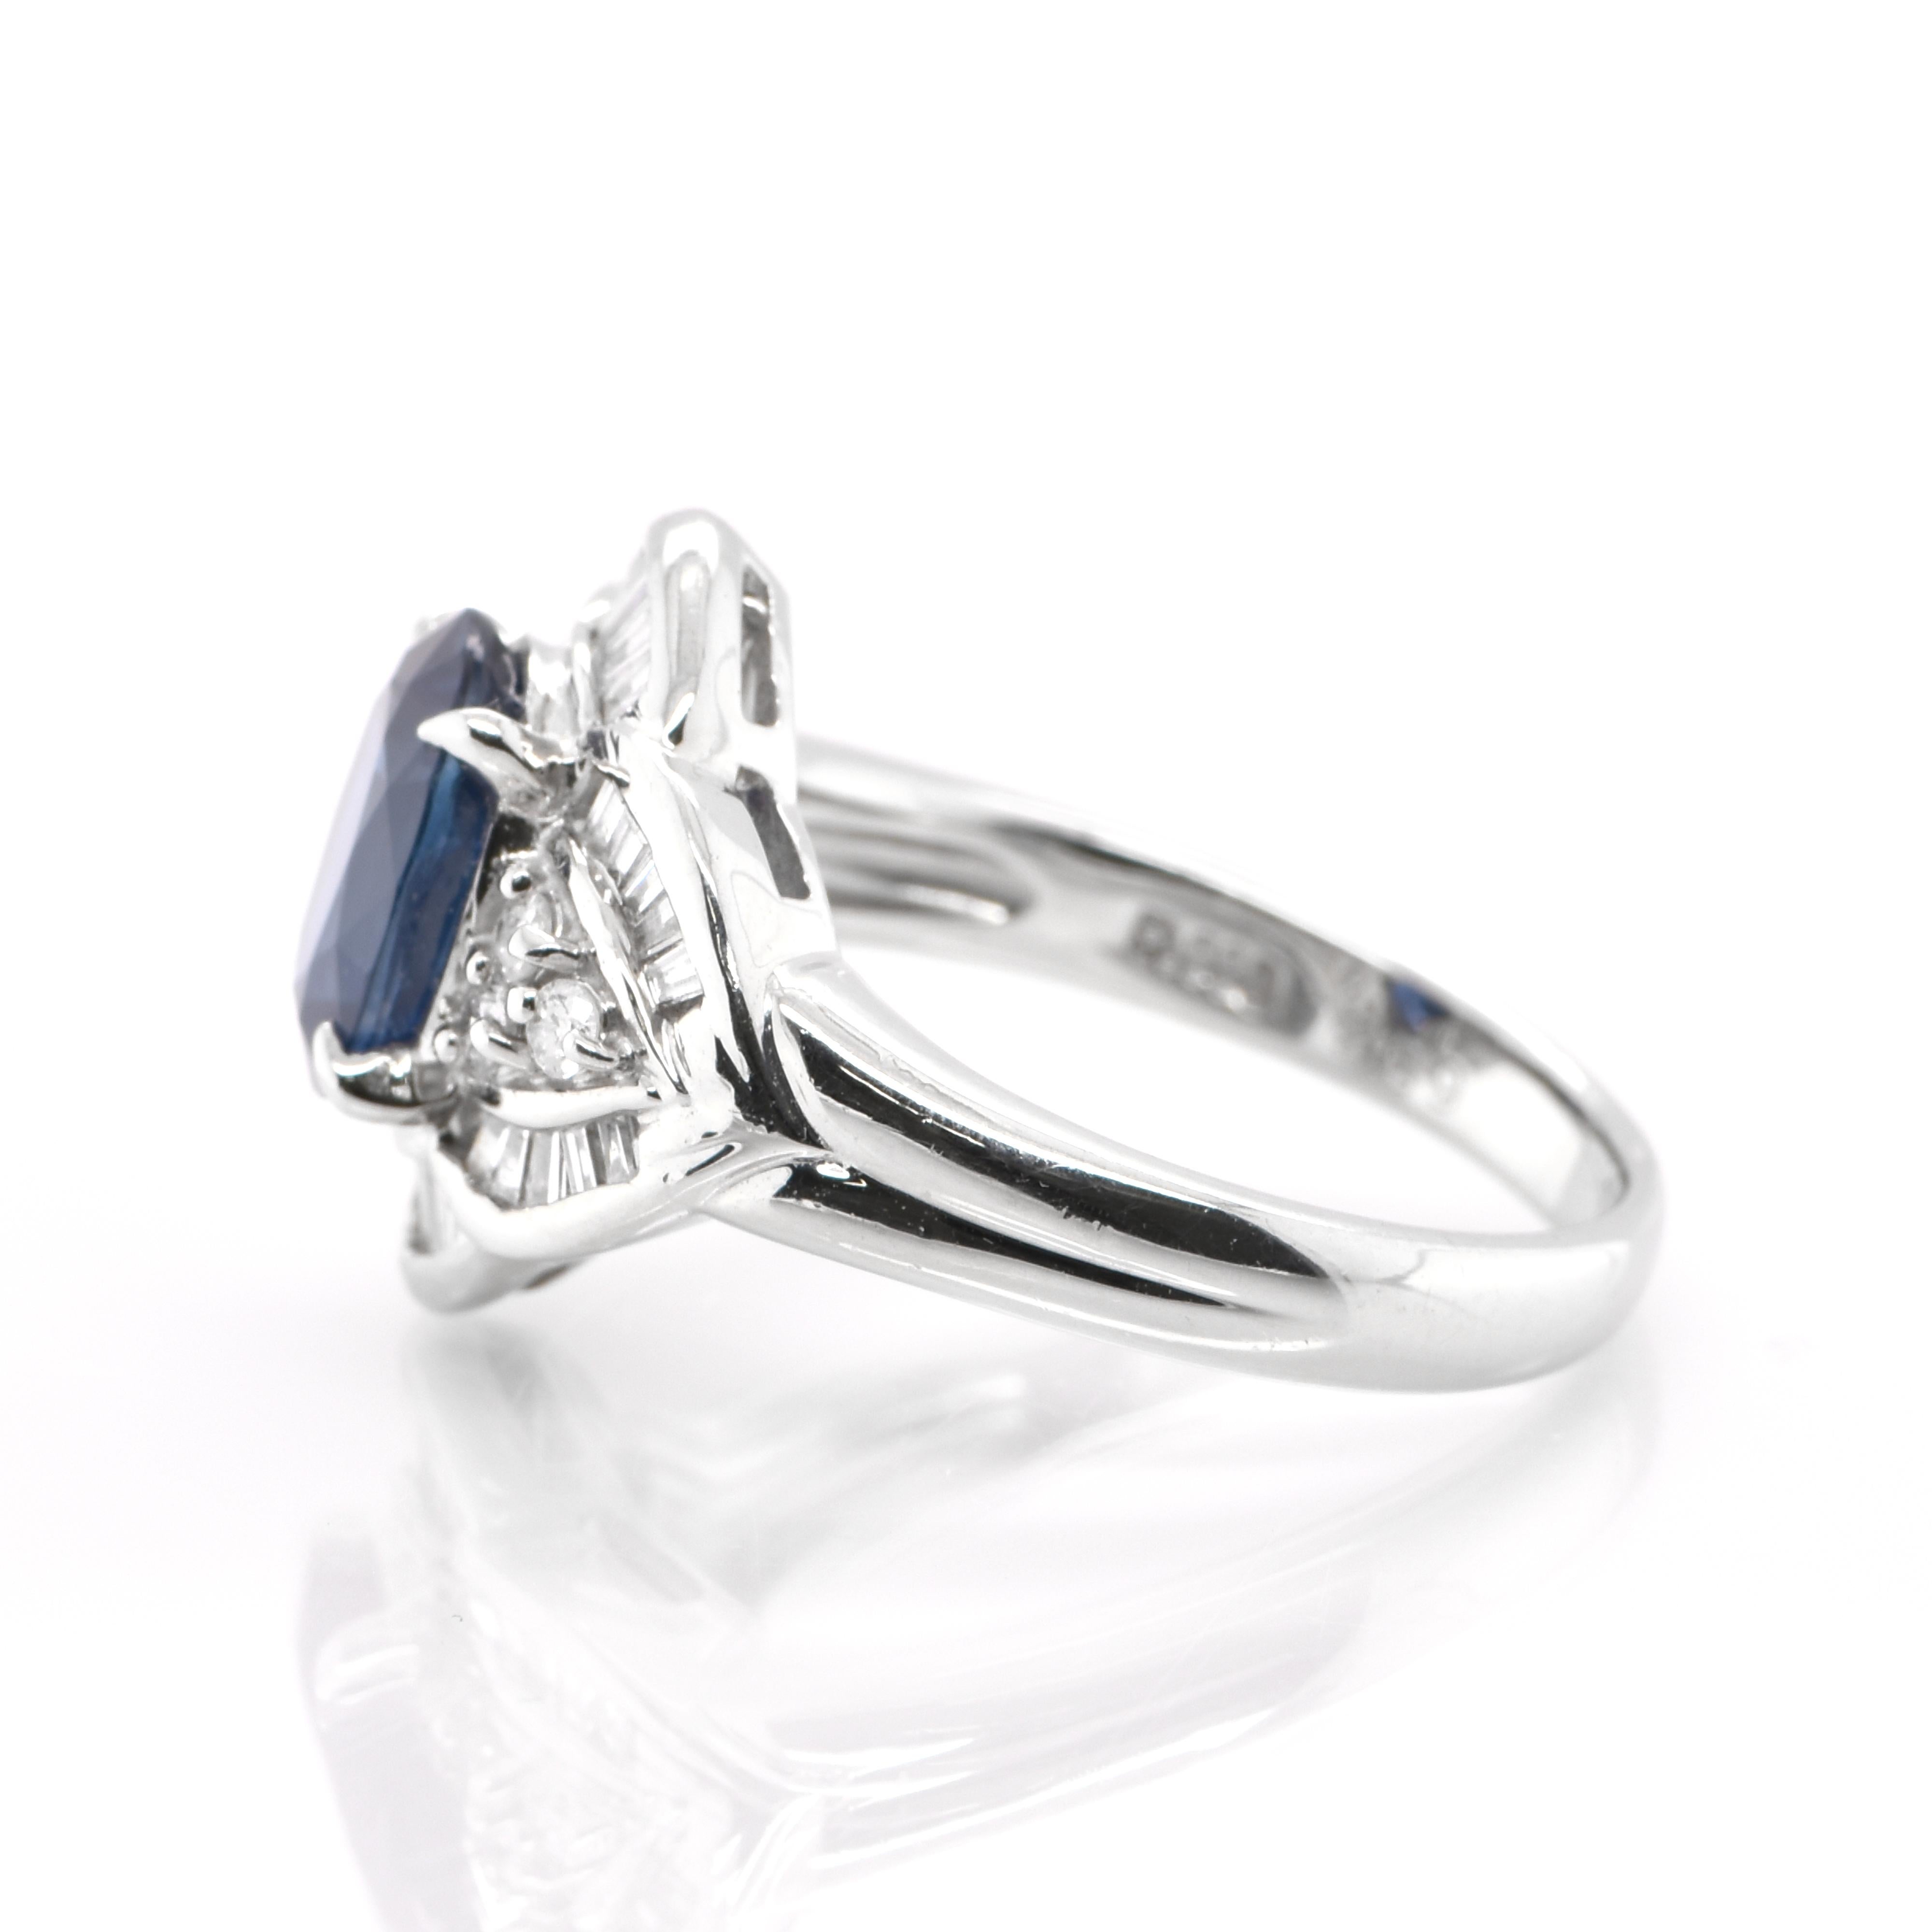 Oval Cut 2.39 Carat Natural Sapphire and Diamond Antique Ring Set in Platinum For Sale